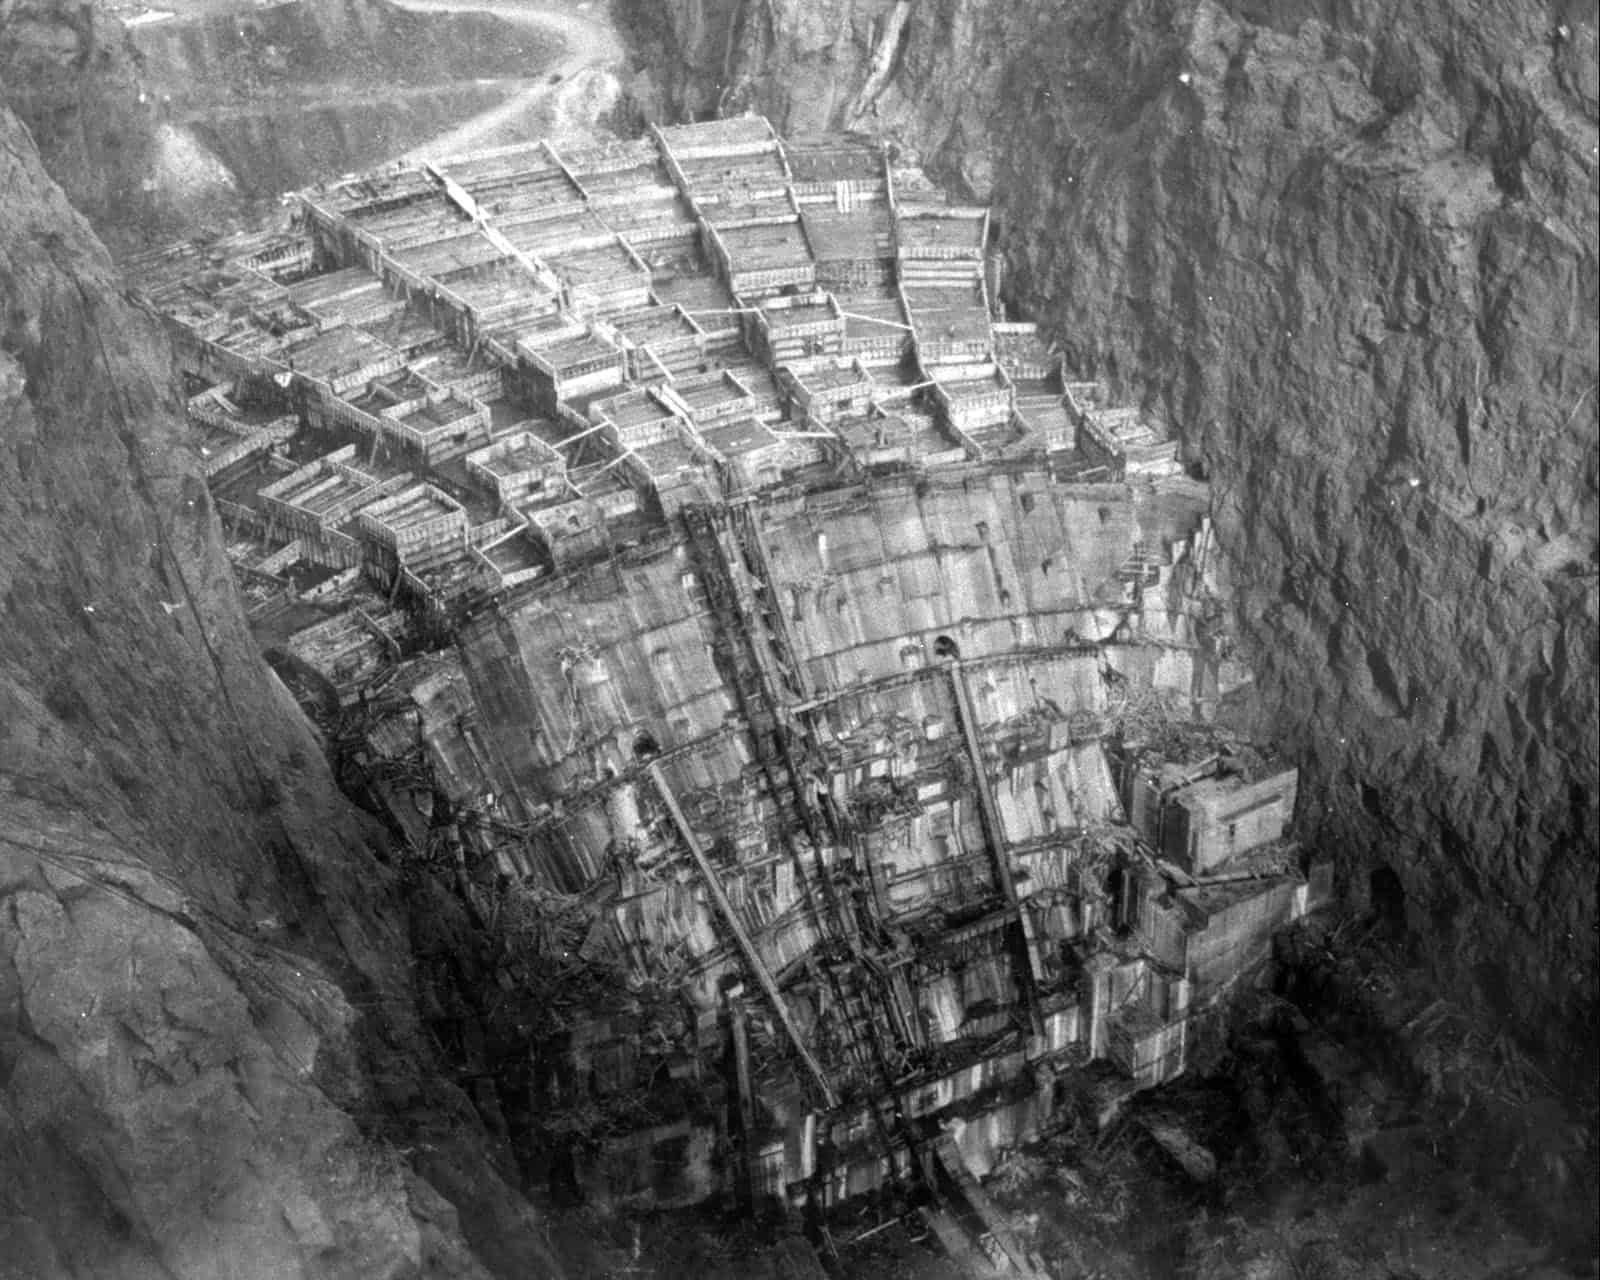 Columns of Hoover Dam being filled with concrete February 1934